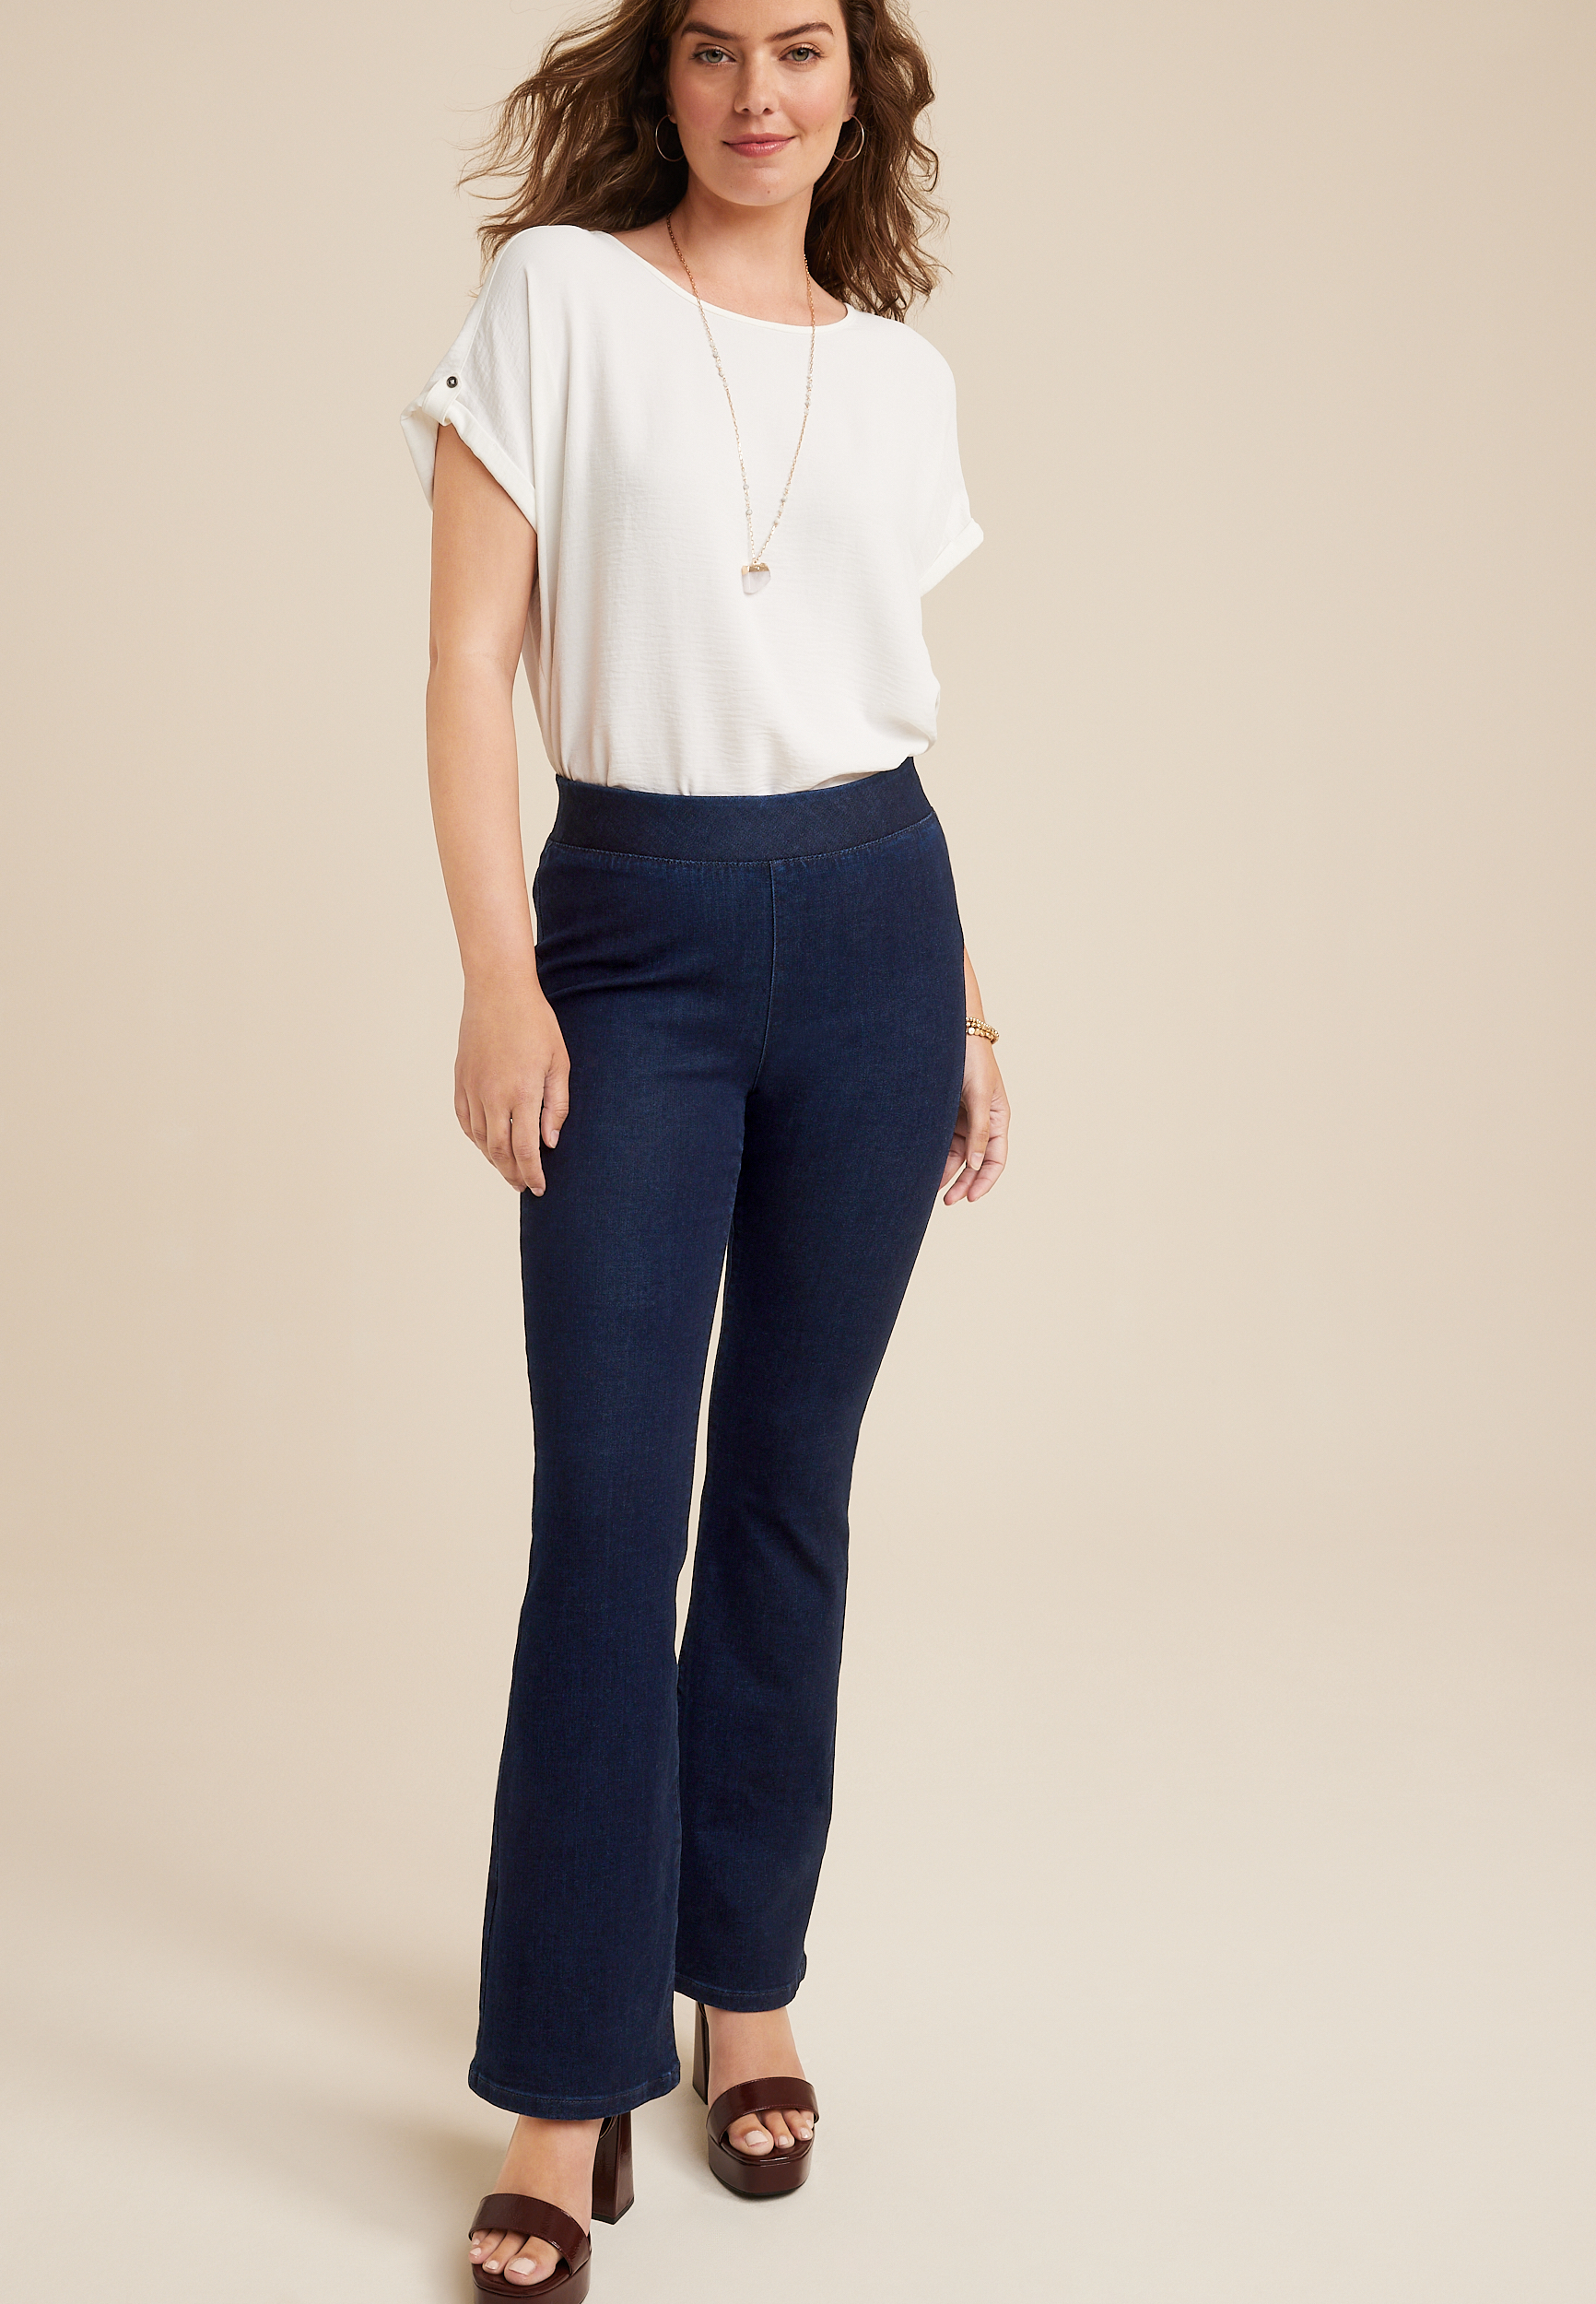 m jeans by maurices™ Flare Sleek Pull On High Rise Jean | maurices